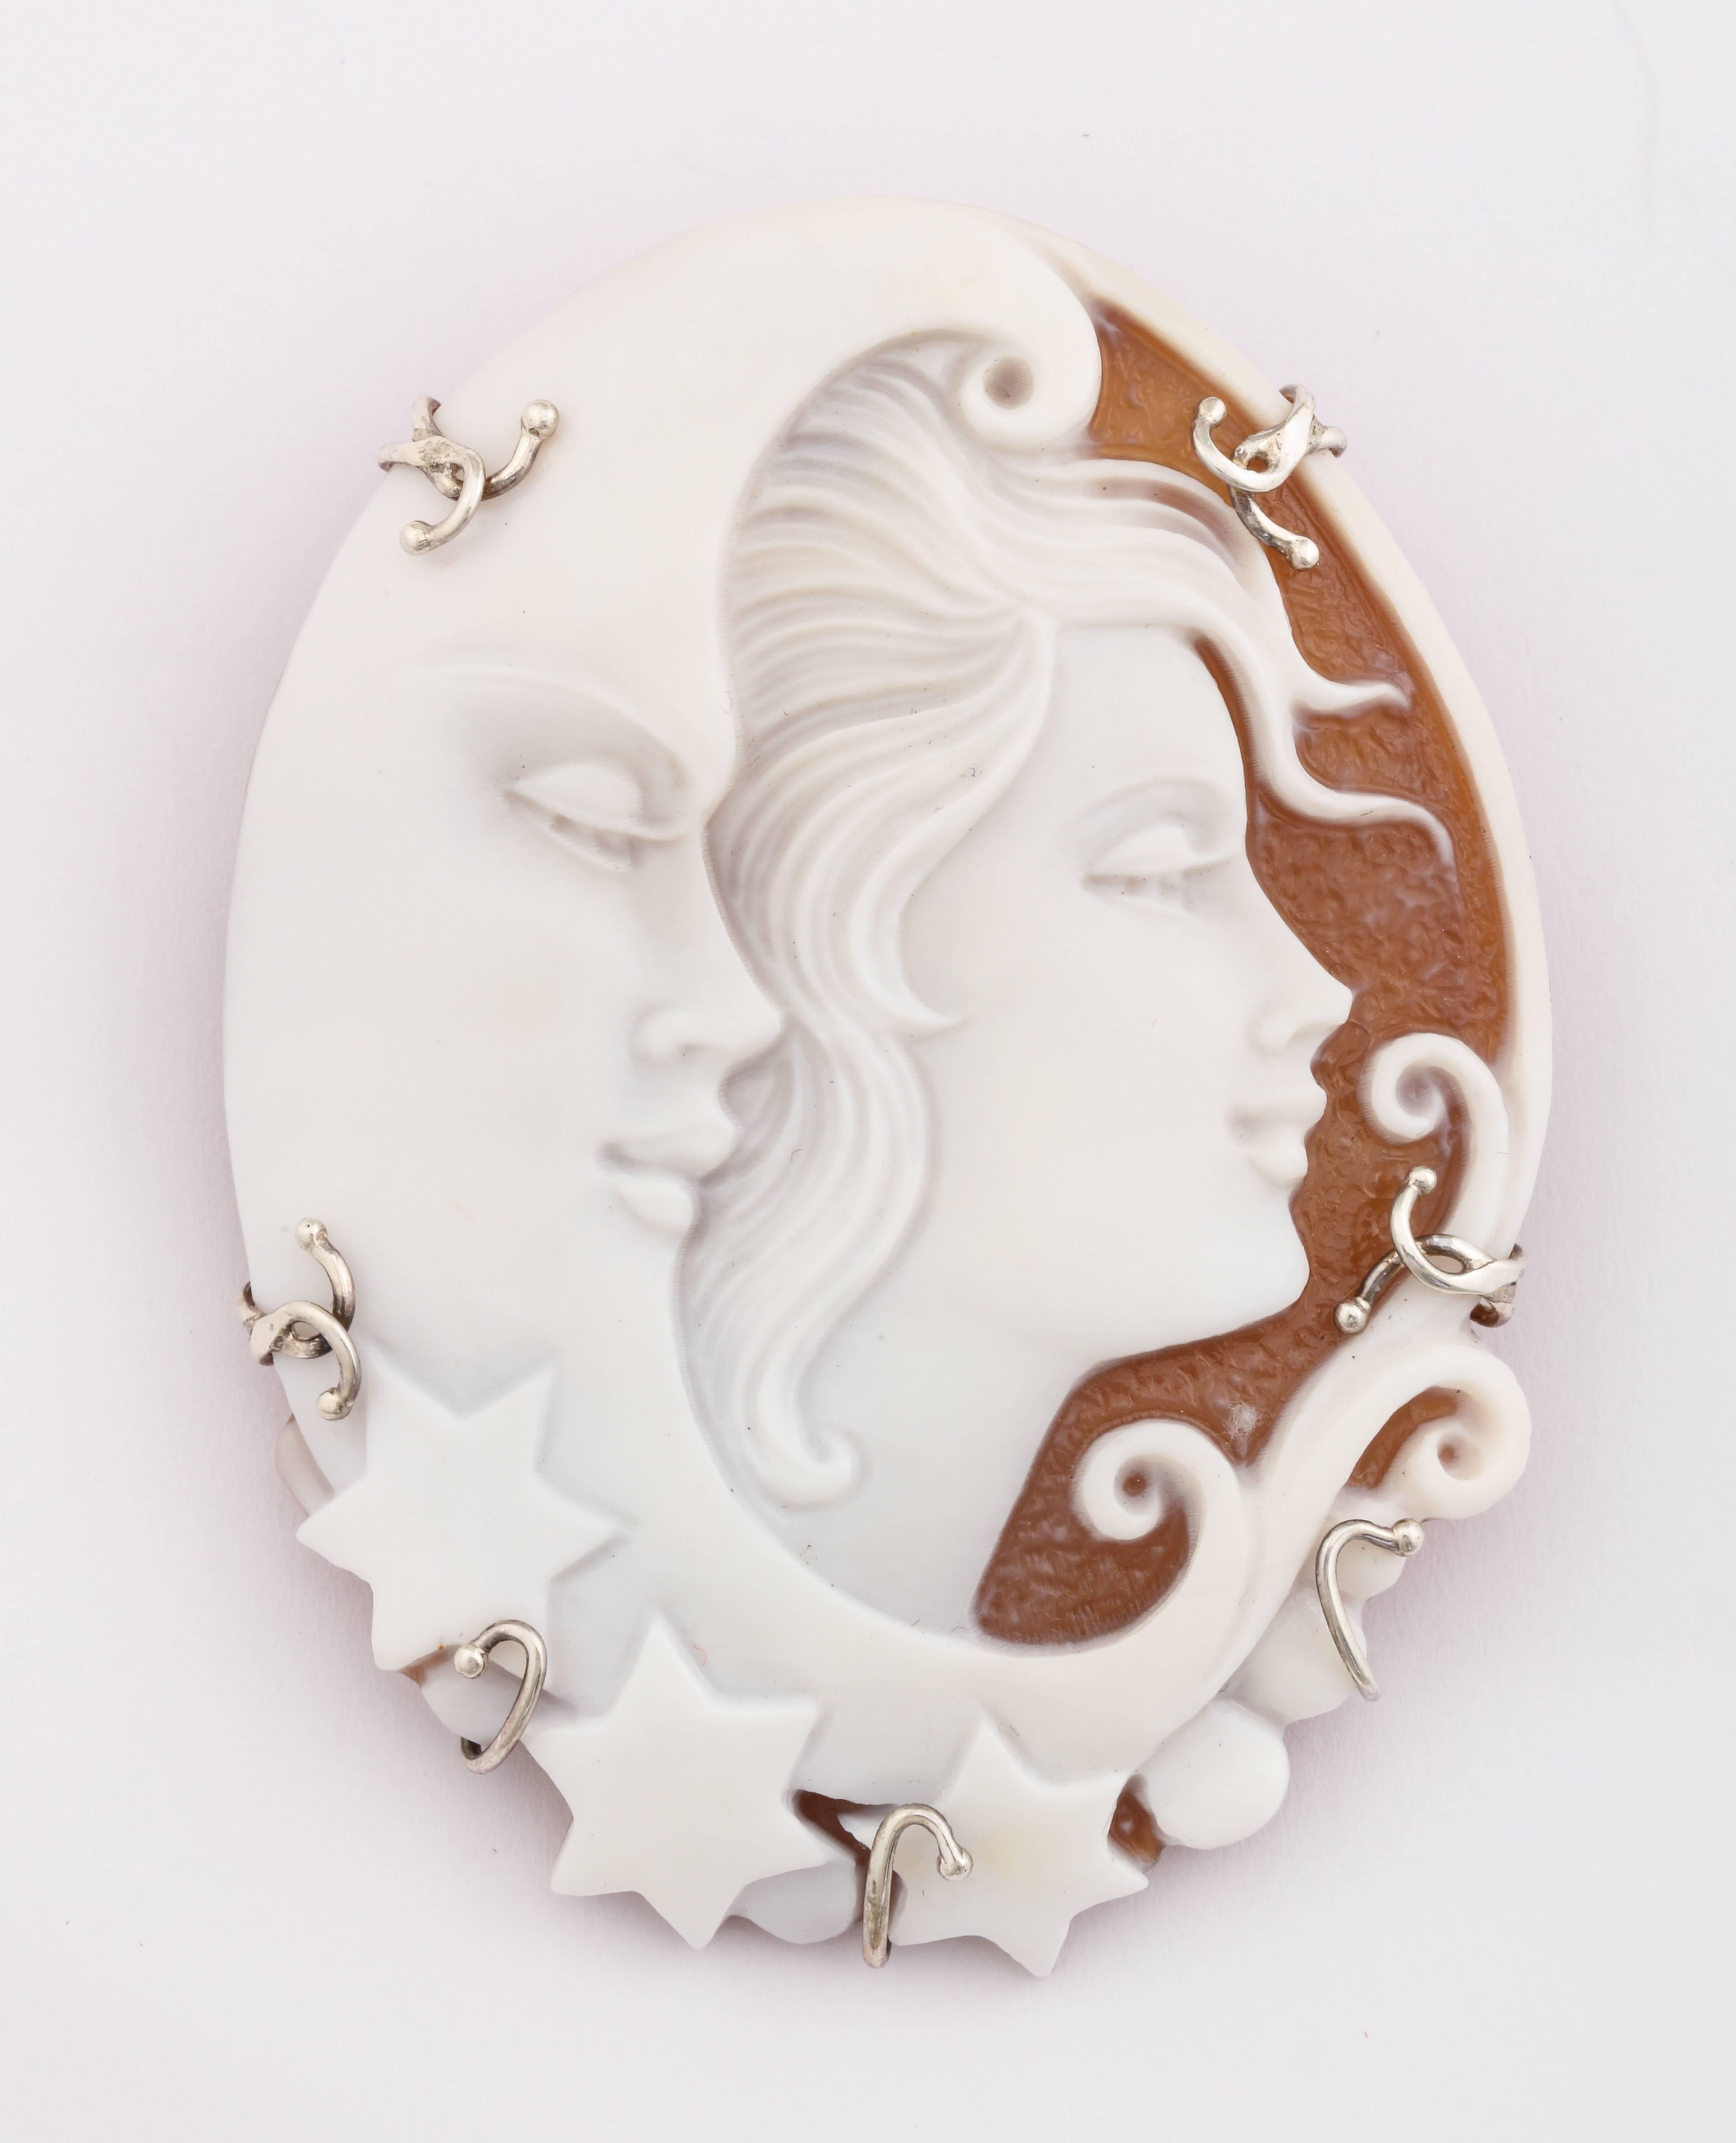 60mm Sardonyx shell cameo hand-carved  and sterling silver brooch/pendant.